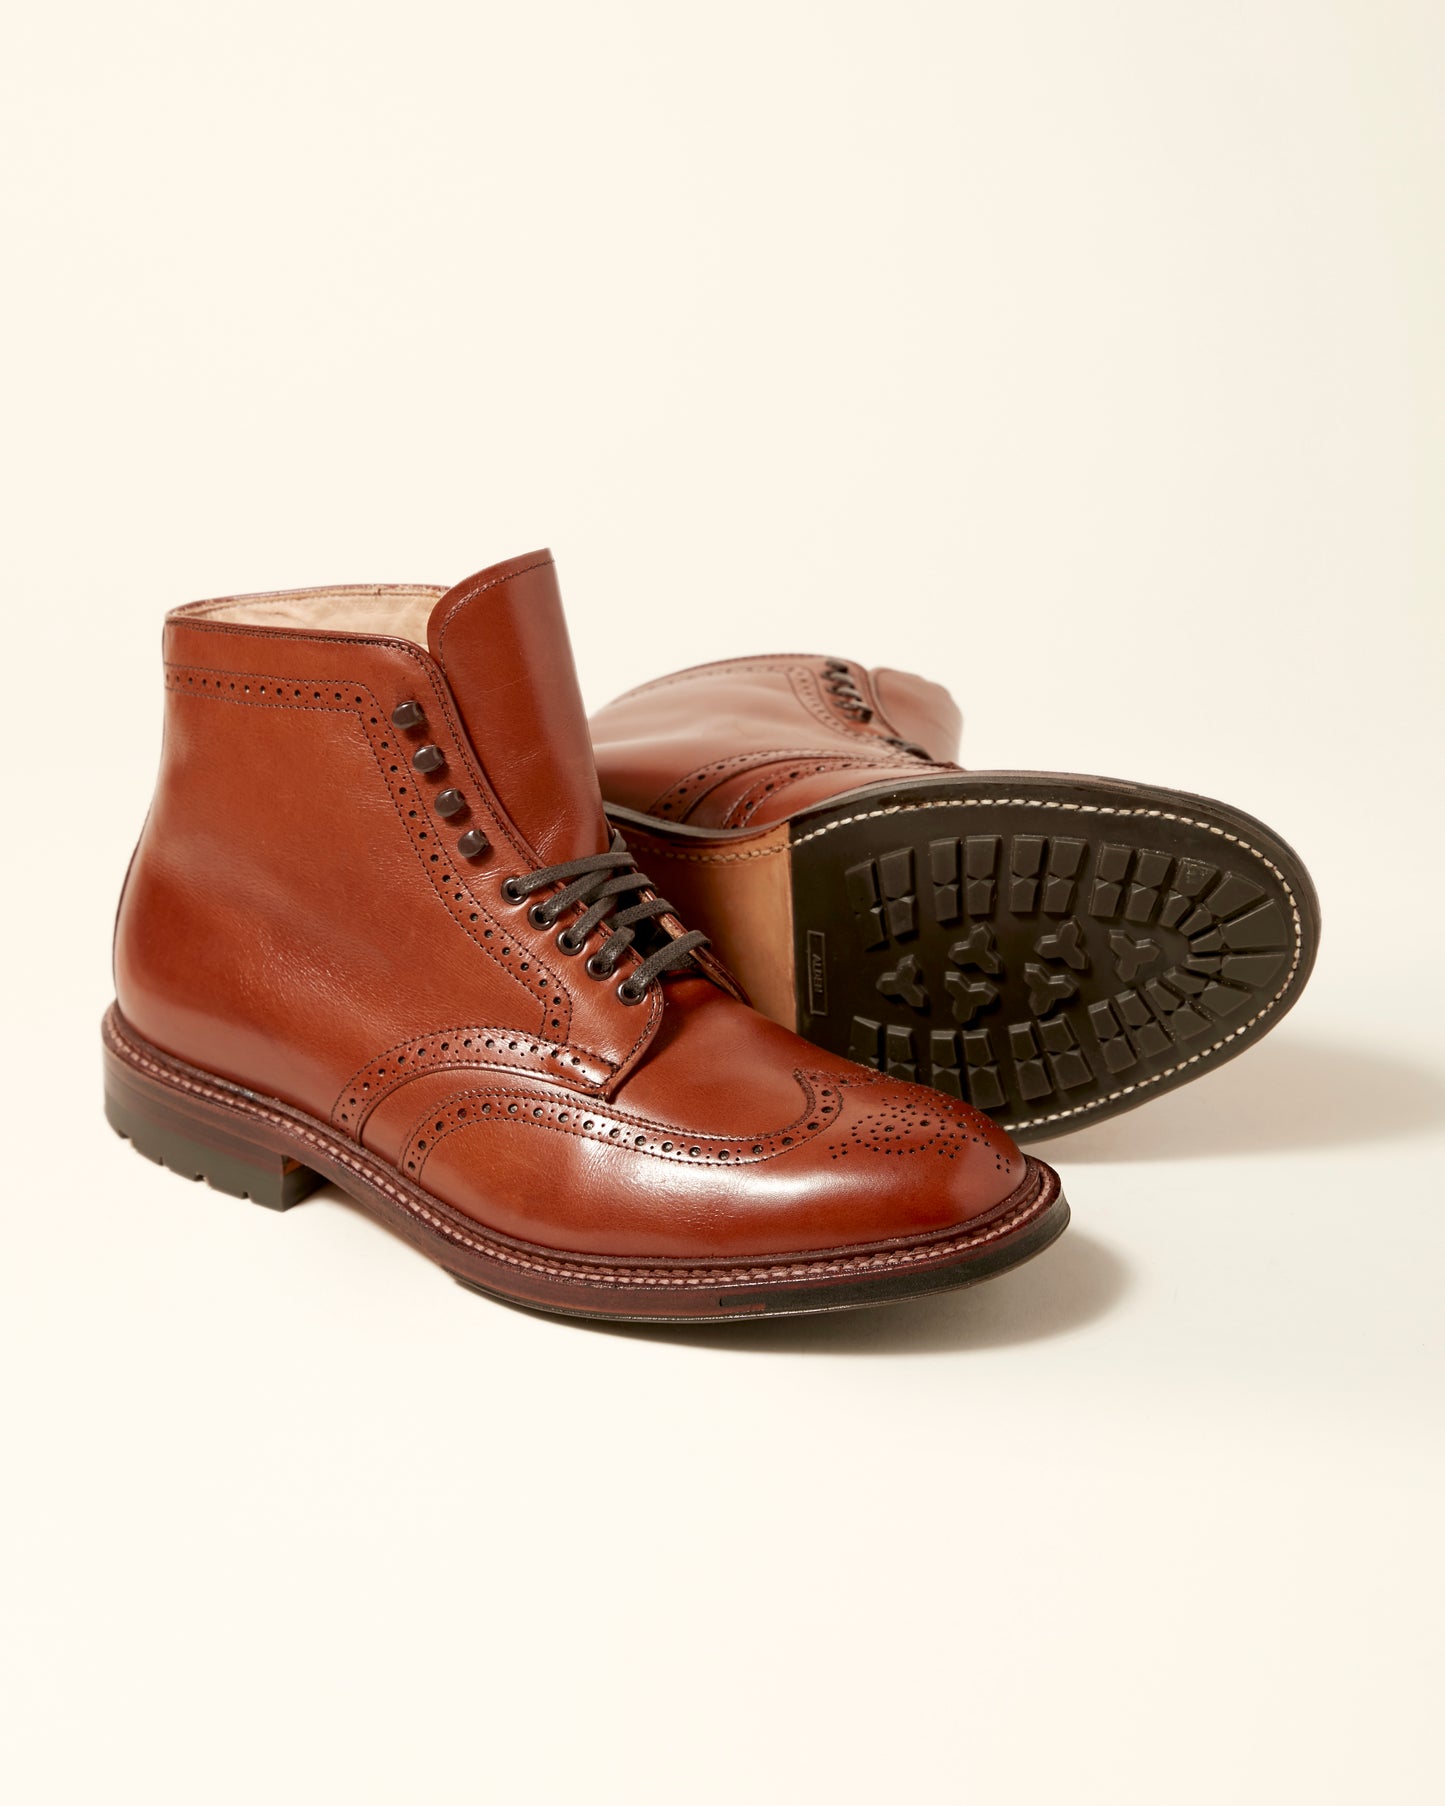 "Ruston Way" Wing Tip Boot in Burnished Tan Calfskin, Barrie Last